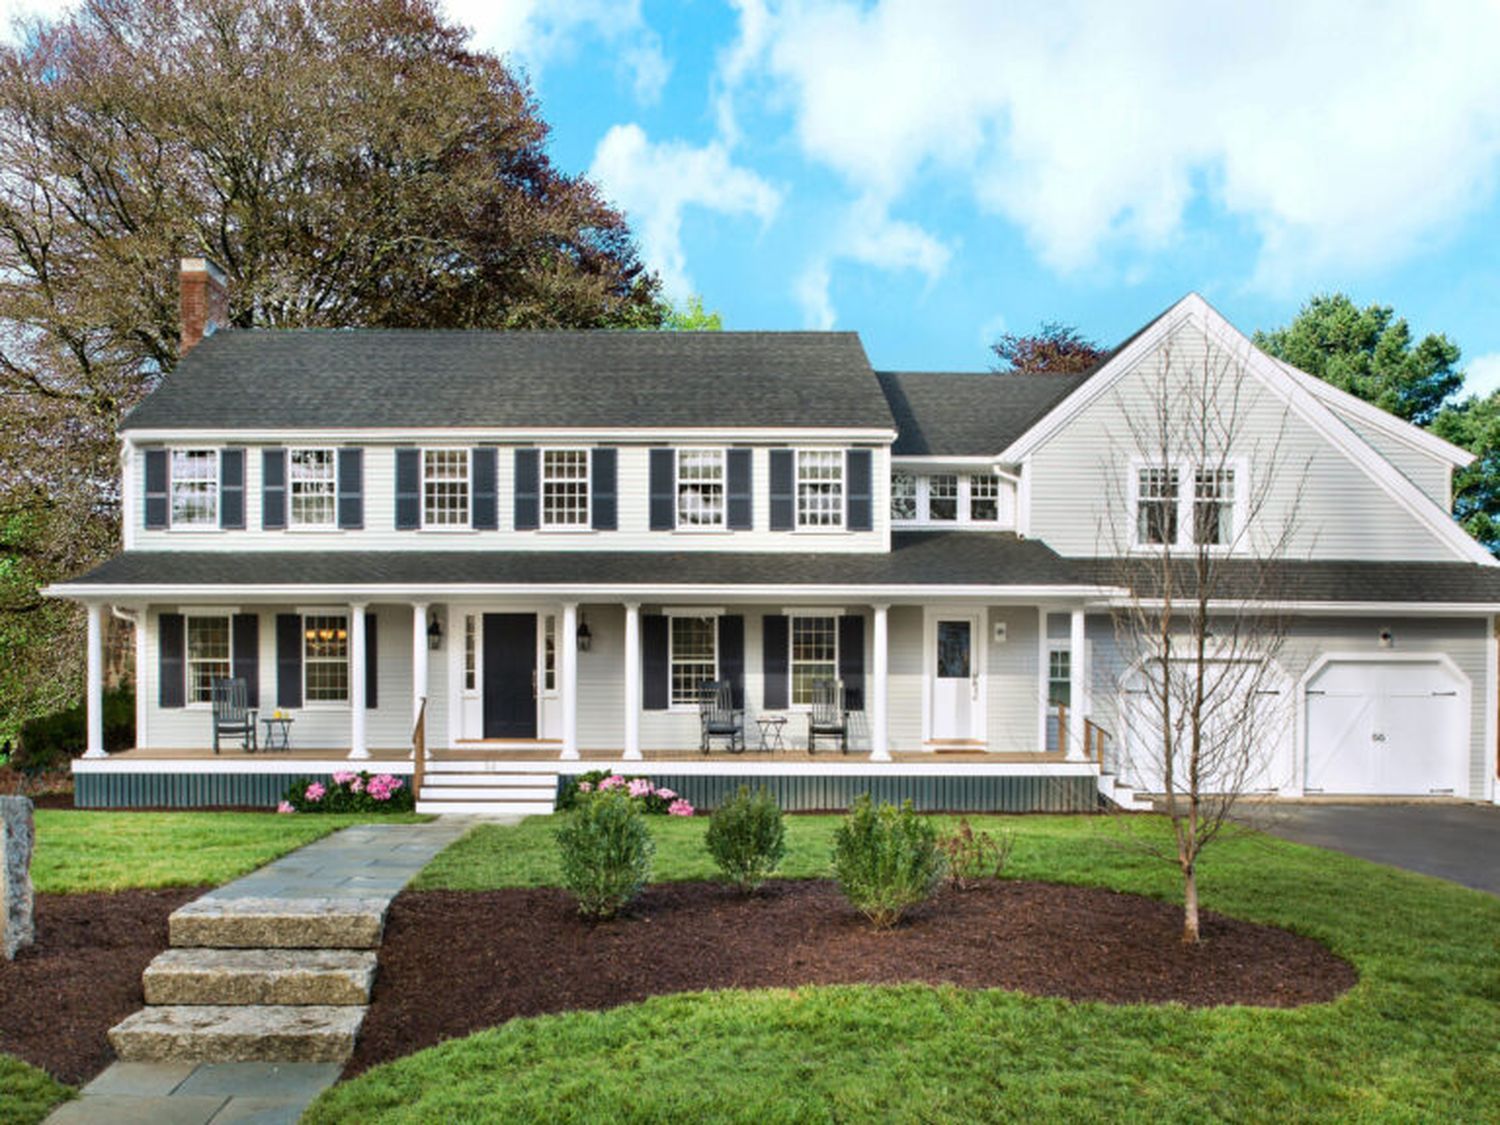 Lexington-Colonial_Exterior-Front-WithFlowerBlossoms-2.0